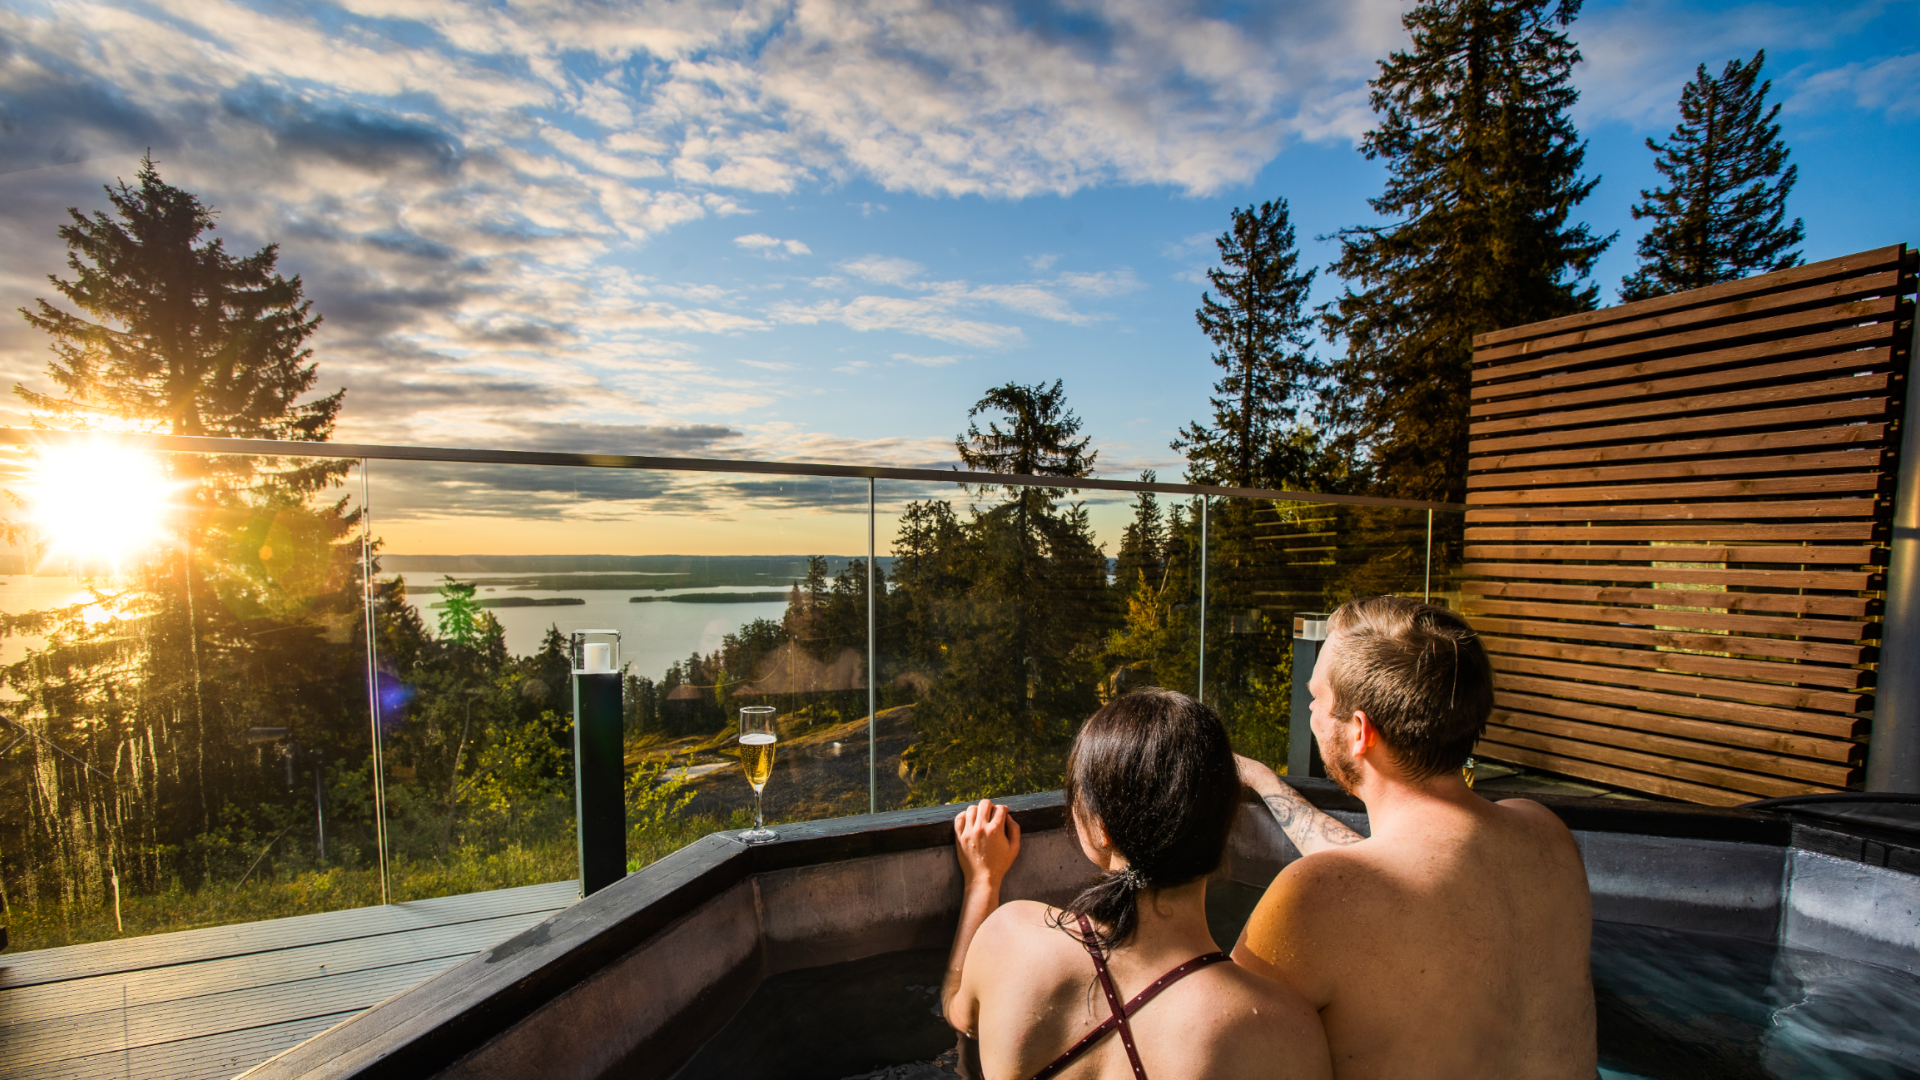 Koli Relax Spa, Opening hours and rates